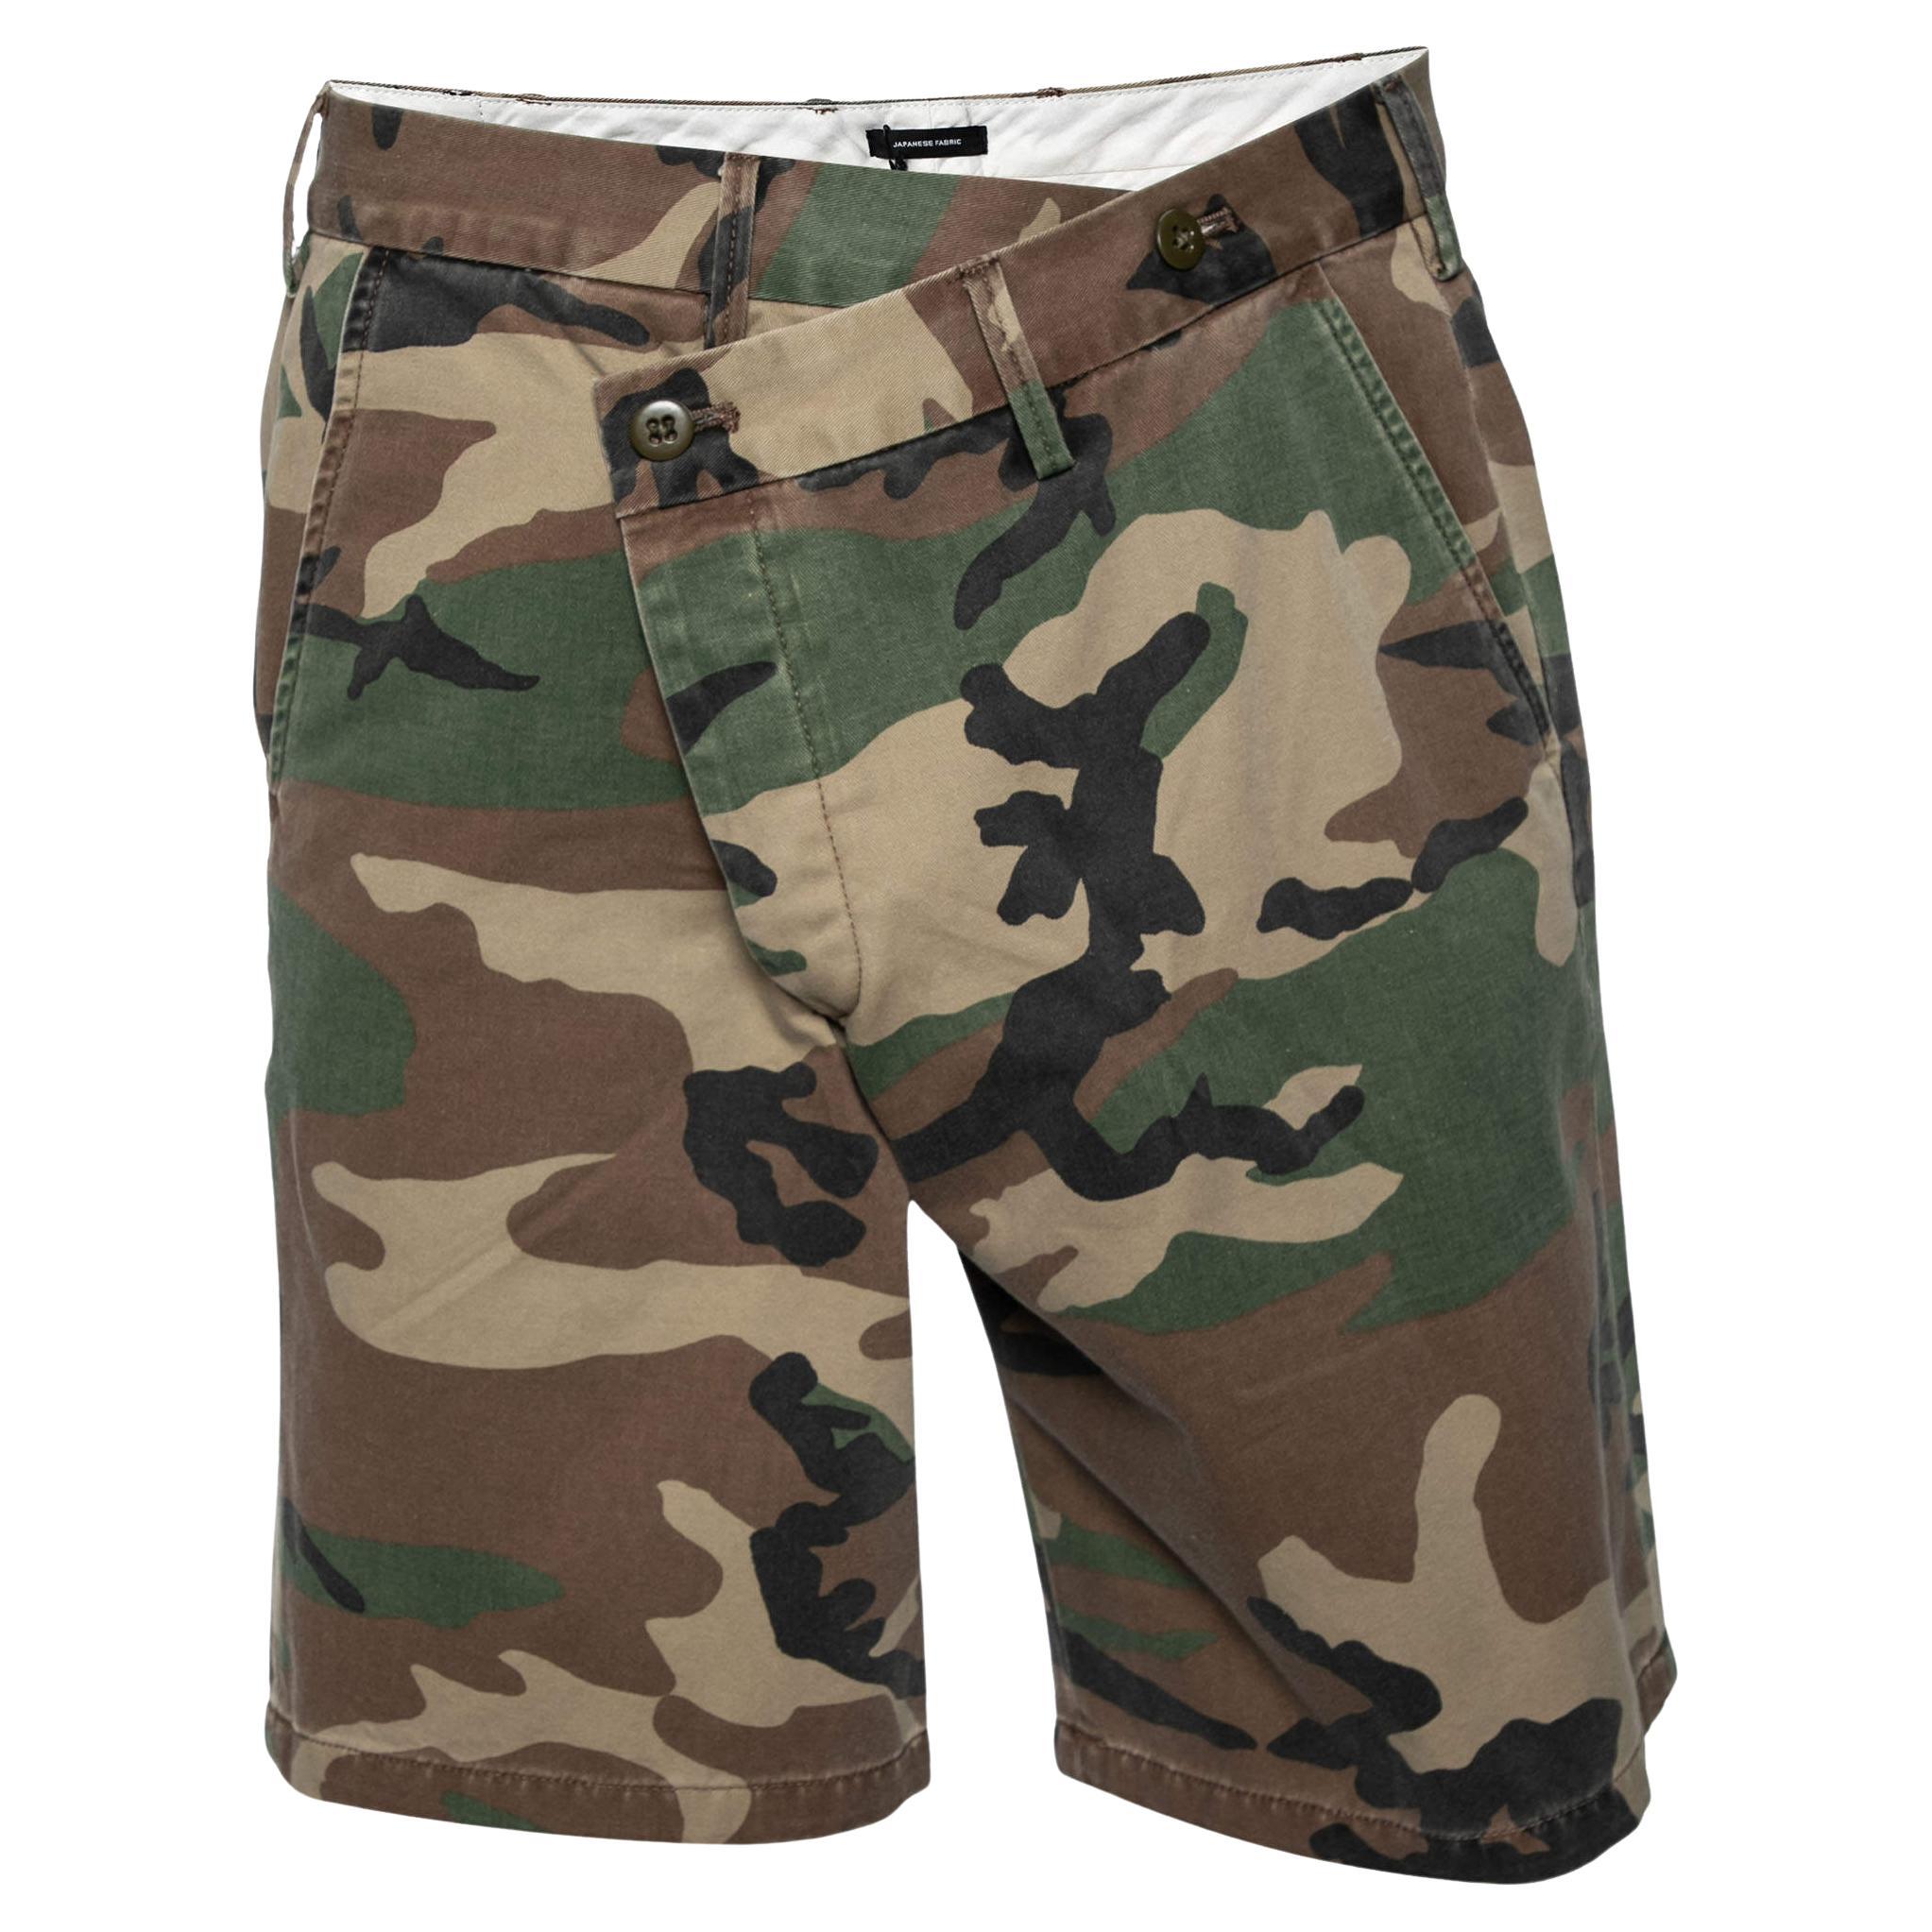 R13 Multicolored Camouflage Print Cotton Crossover Waist Shorts M For Sale